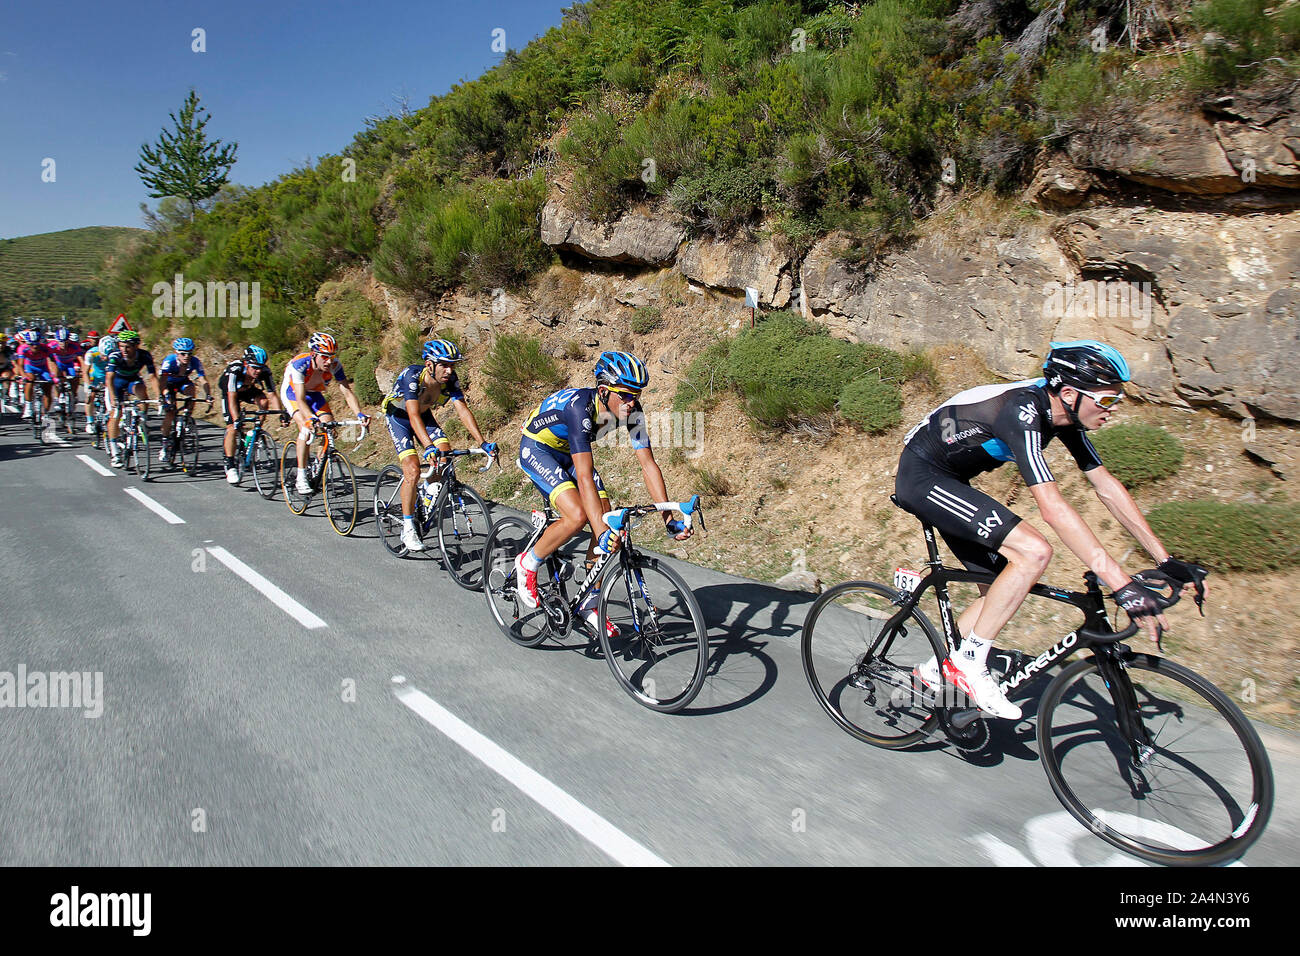 Christopher Froome (r) and Alberto Contador (2r) leading the gruop during the stage of La Vuelta 2012 between Barakaldo and Valdezcaray.August 21,2012 Stock Photo